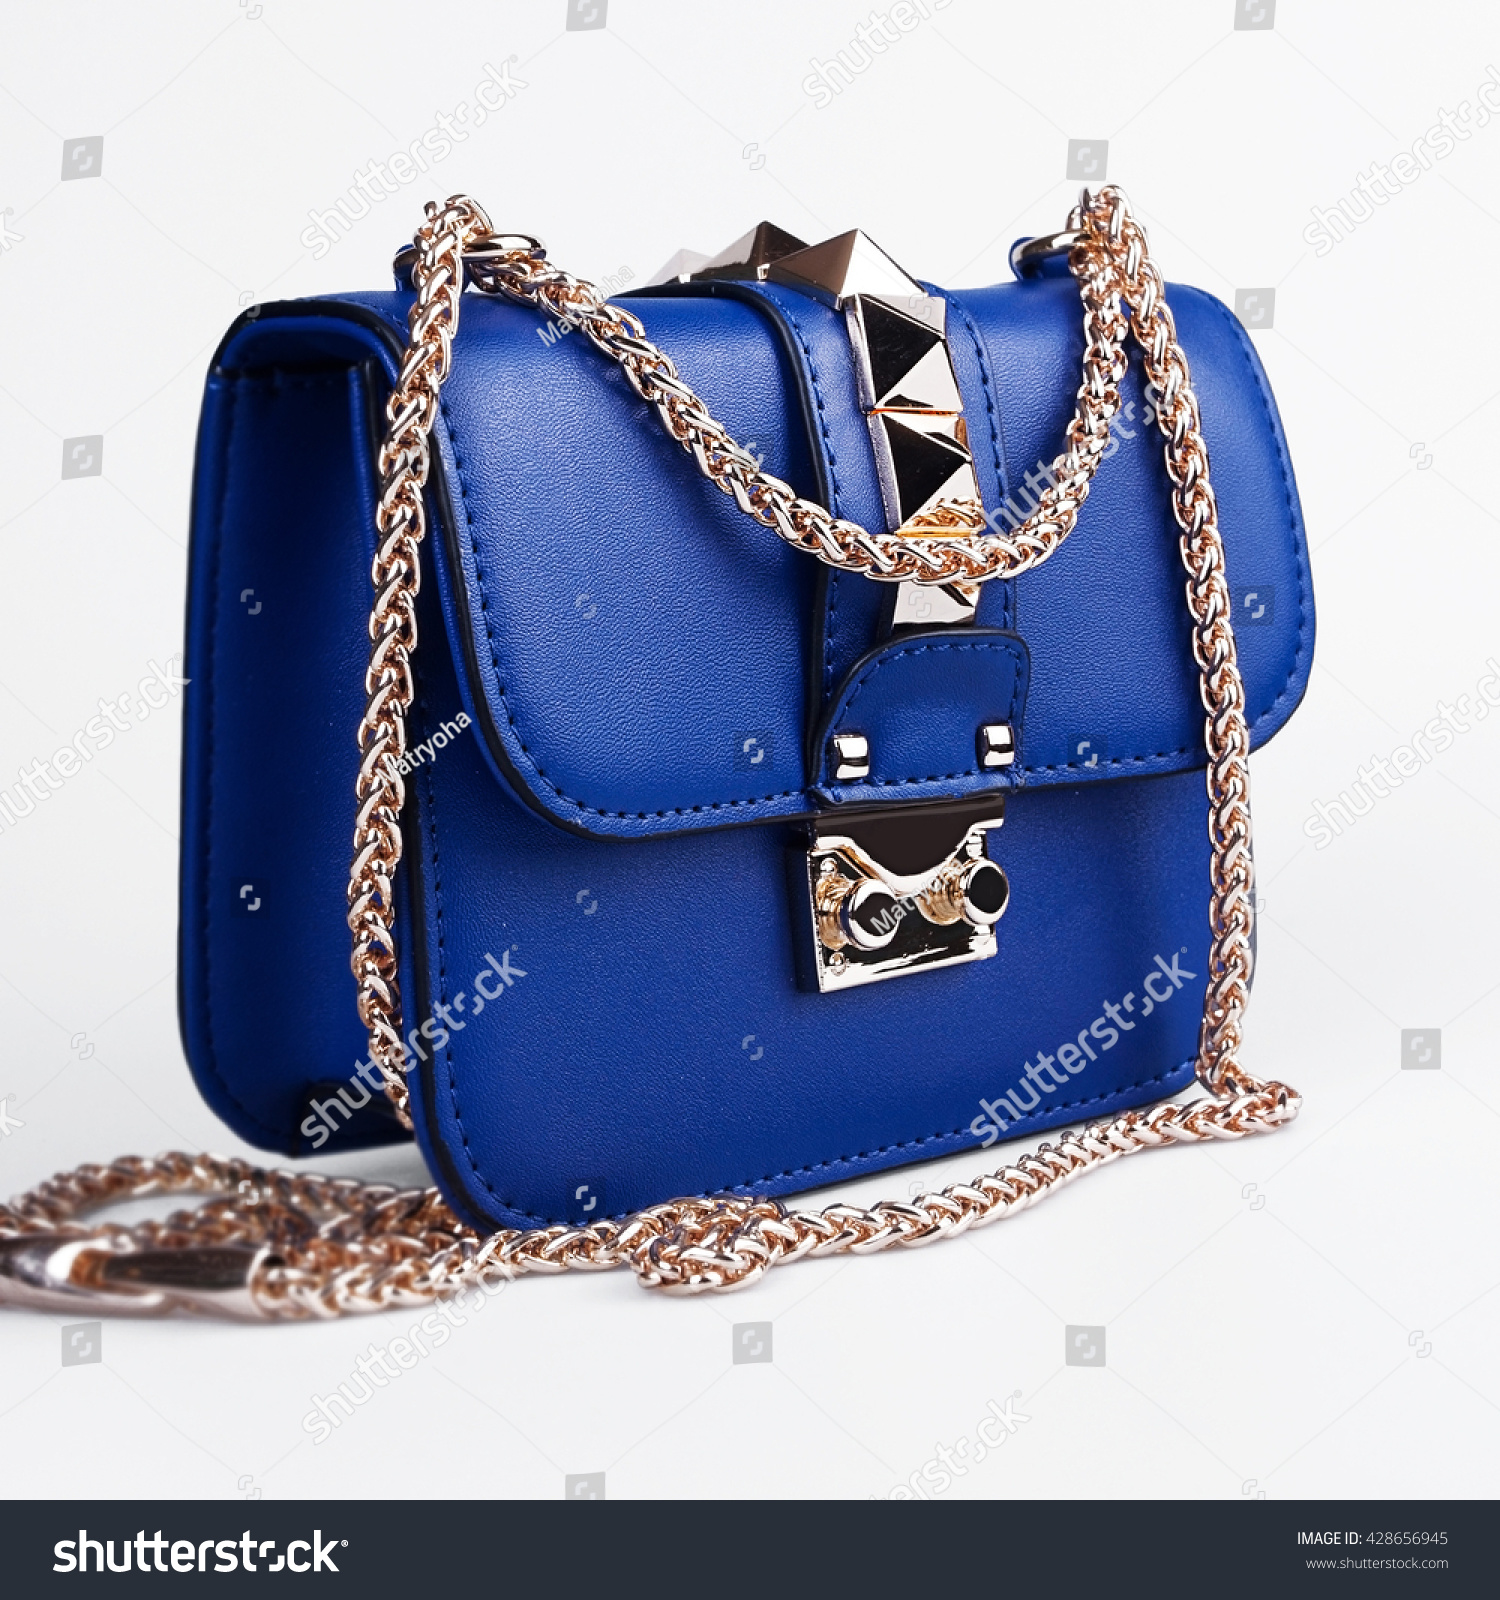 Blue Female Bag On A White Background Stock Photo 428656945 : Shutterstock